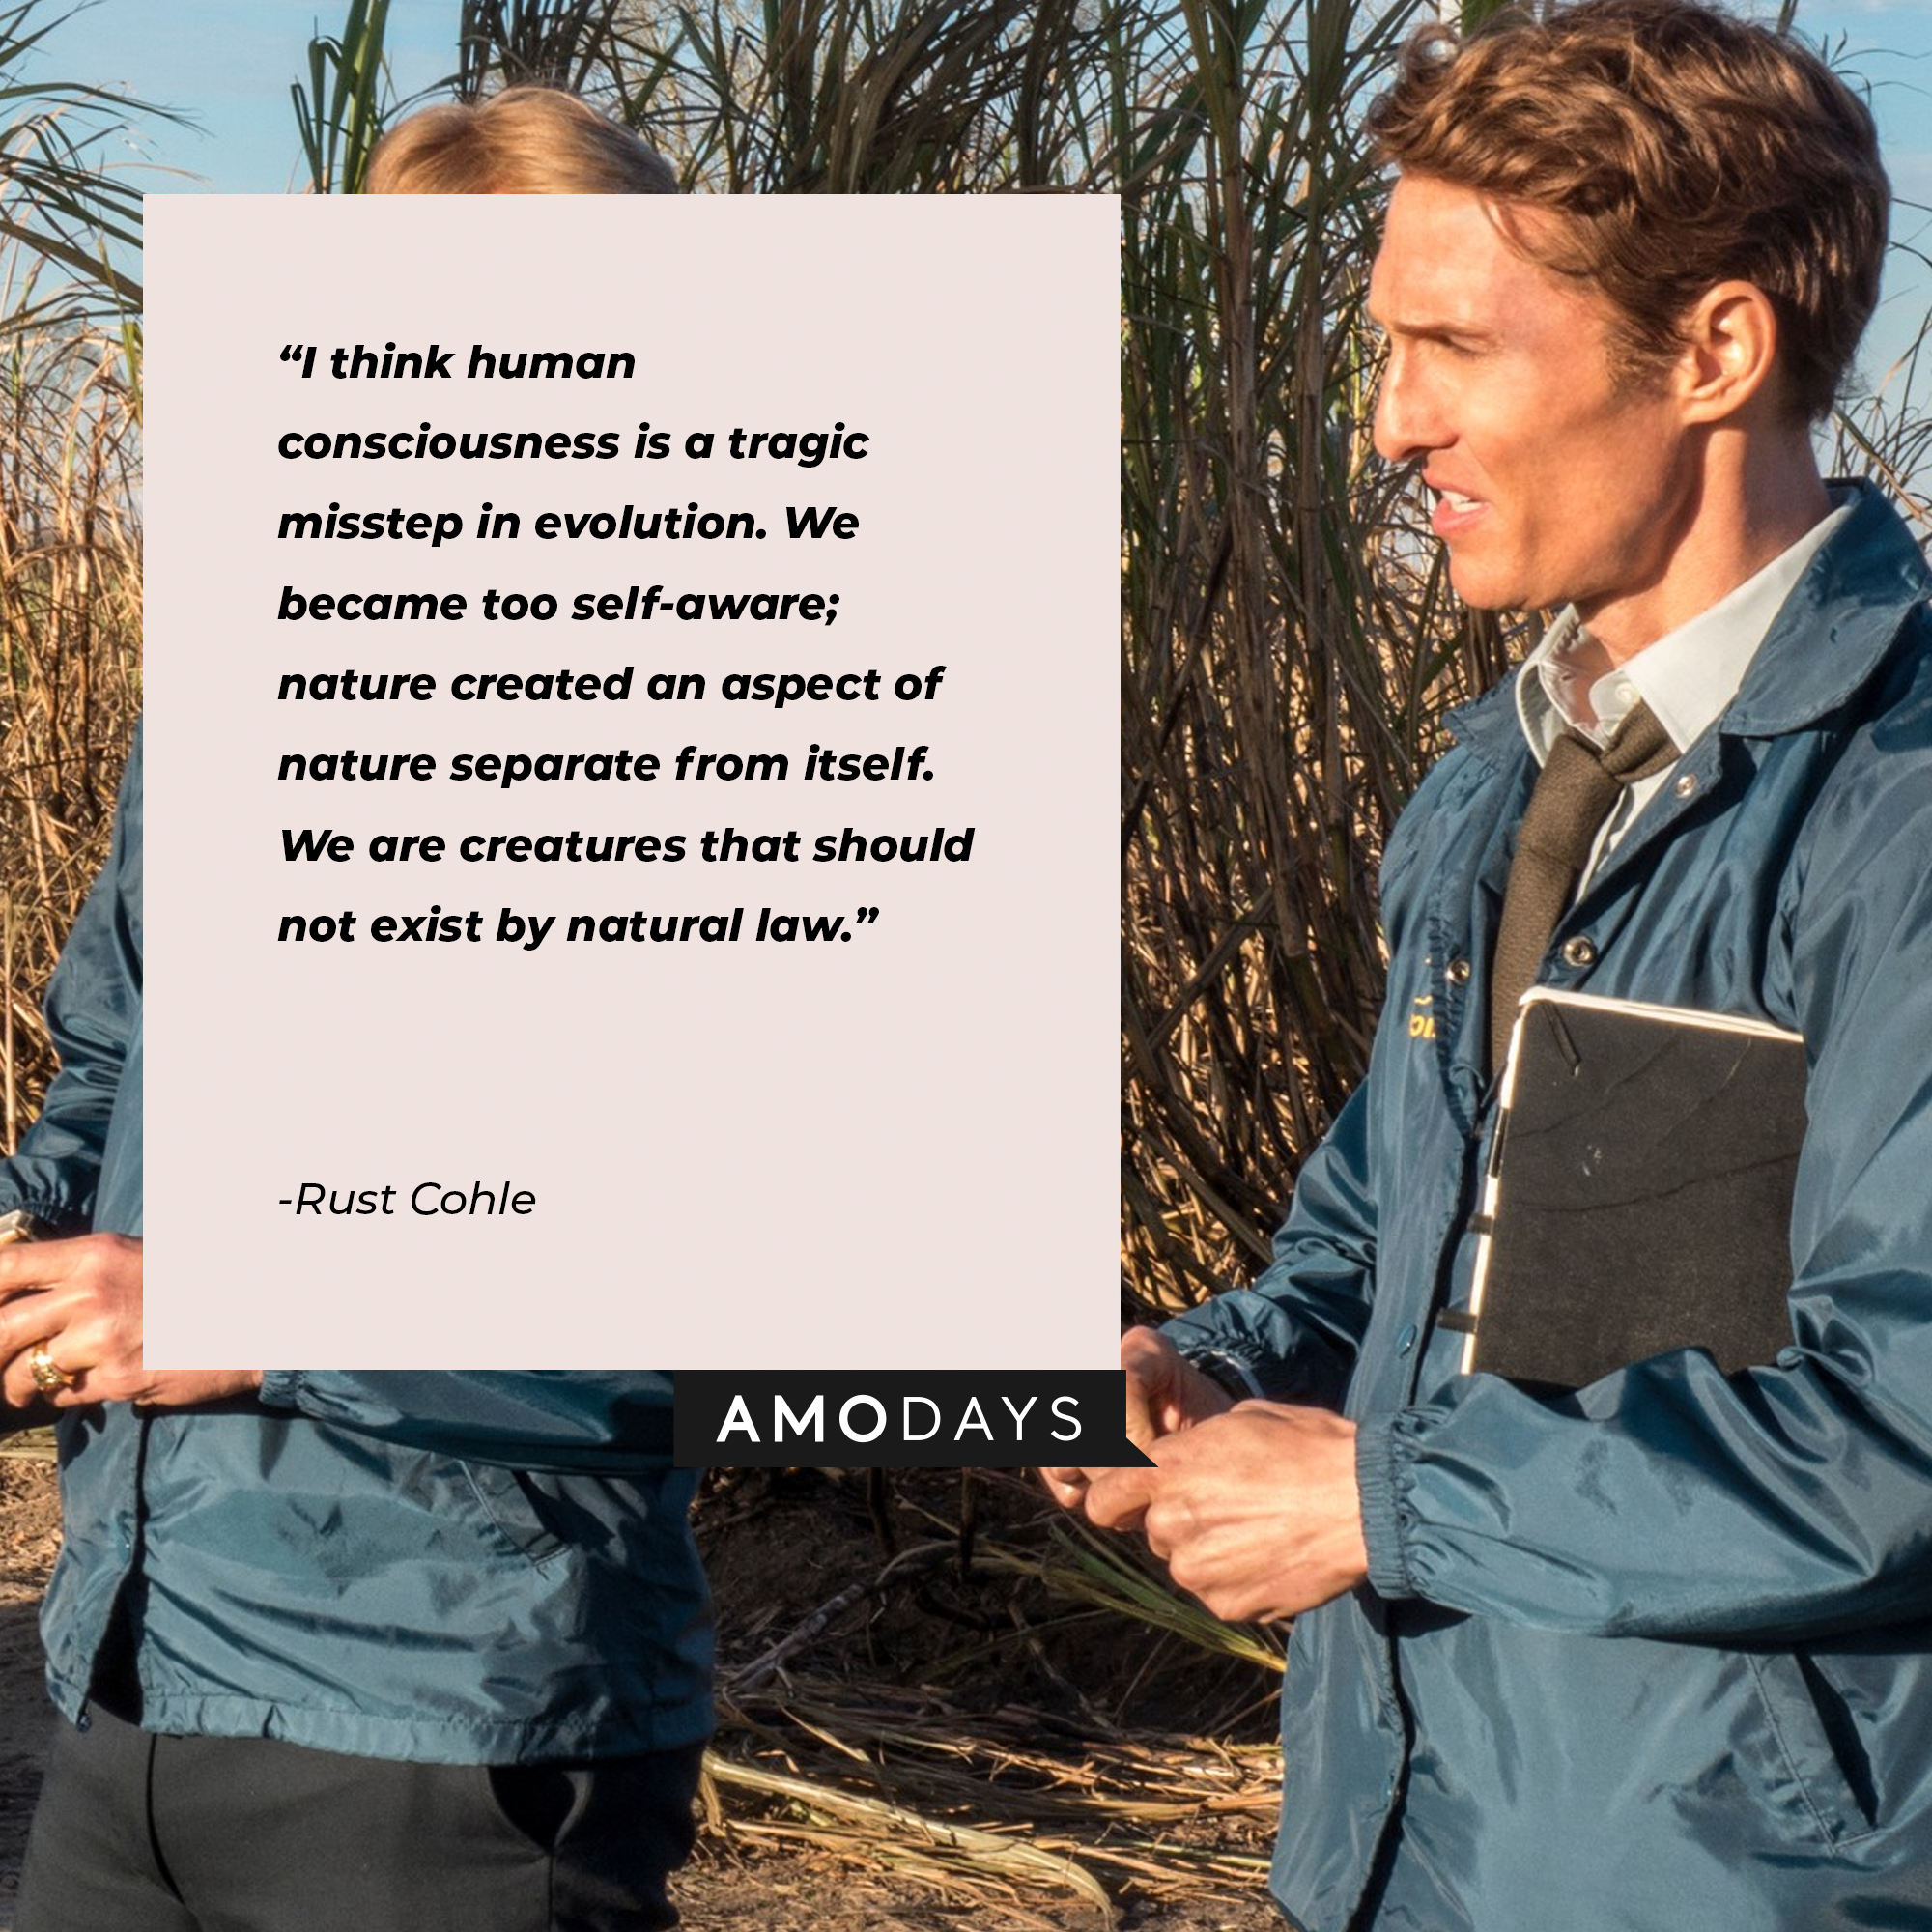 A photo of Rust Cohle with the quote, "I think human consciousness is a tragic misstep in evolution. We became too self-aware; nature created an aspect of nature separate from itself. We are creatures that should not exist by natural law." | Source: Facebook/TrueDetective